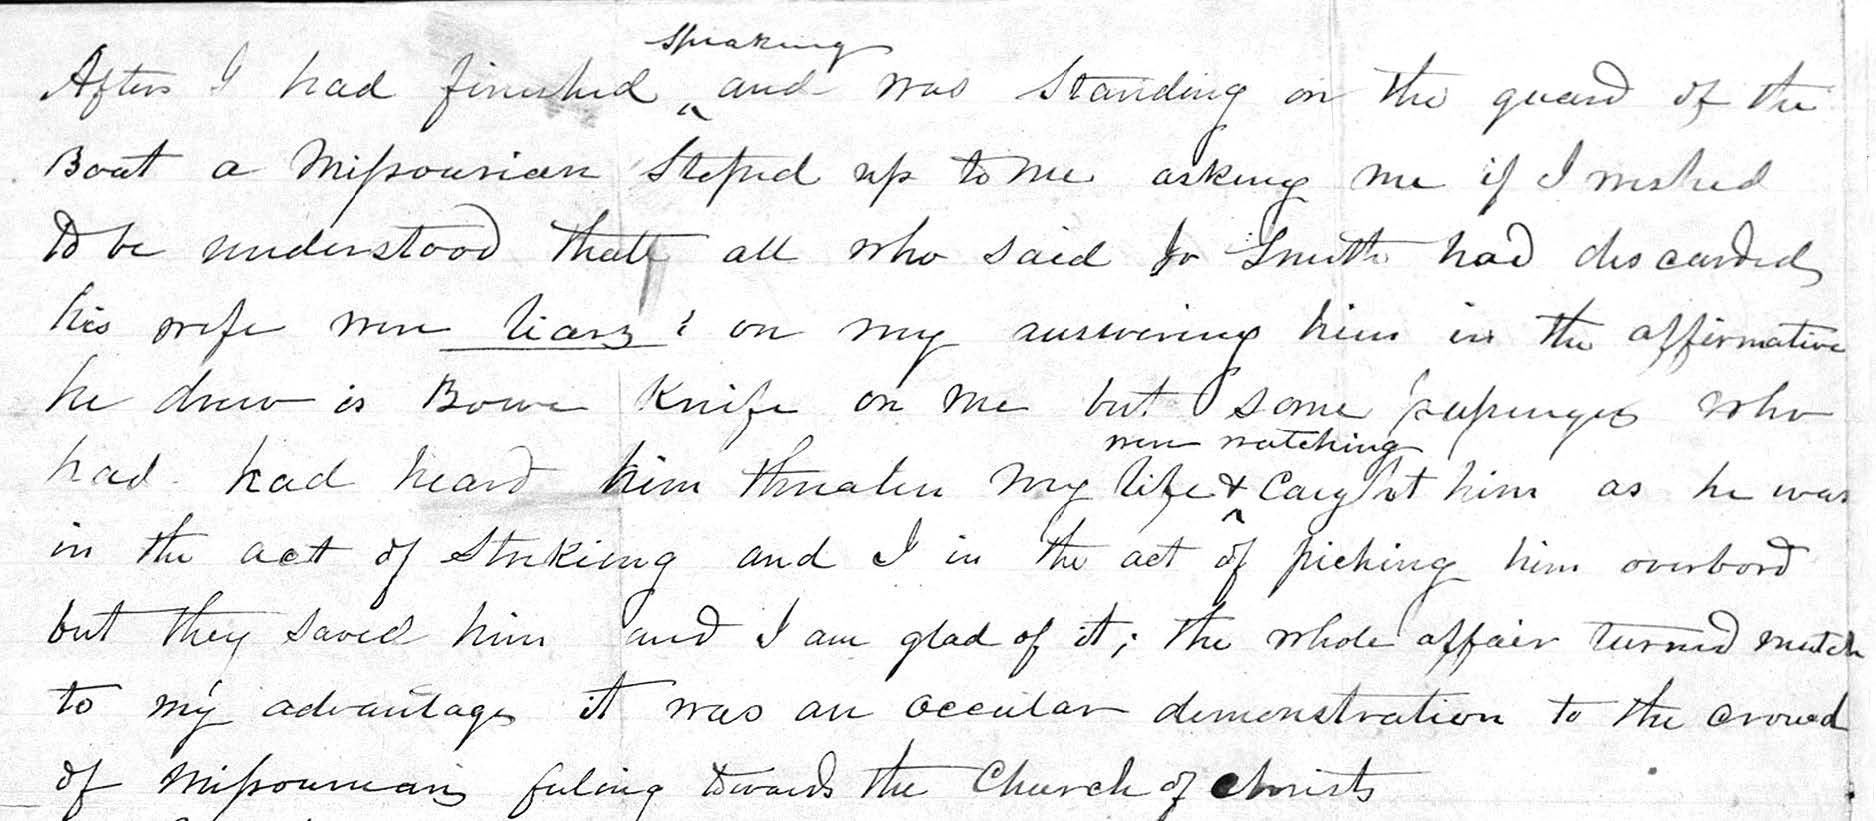 Electioneer David S. Hollister’s letter describes his being attacked on a steamboat by a “Missourian” with a “Bowie Knife” for advocating “Jo Smith.” David Hollister to Joseph Smith, 9 May 1844. © IRI. Used by permission.